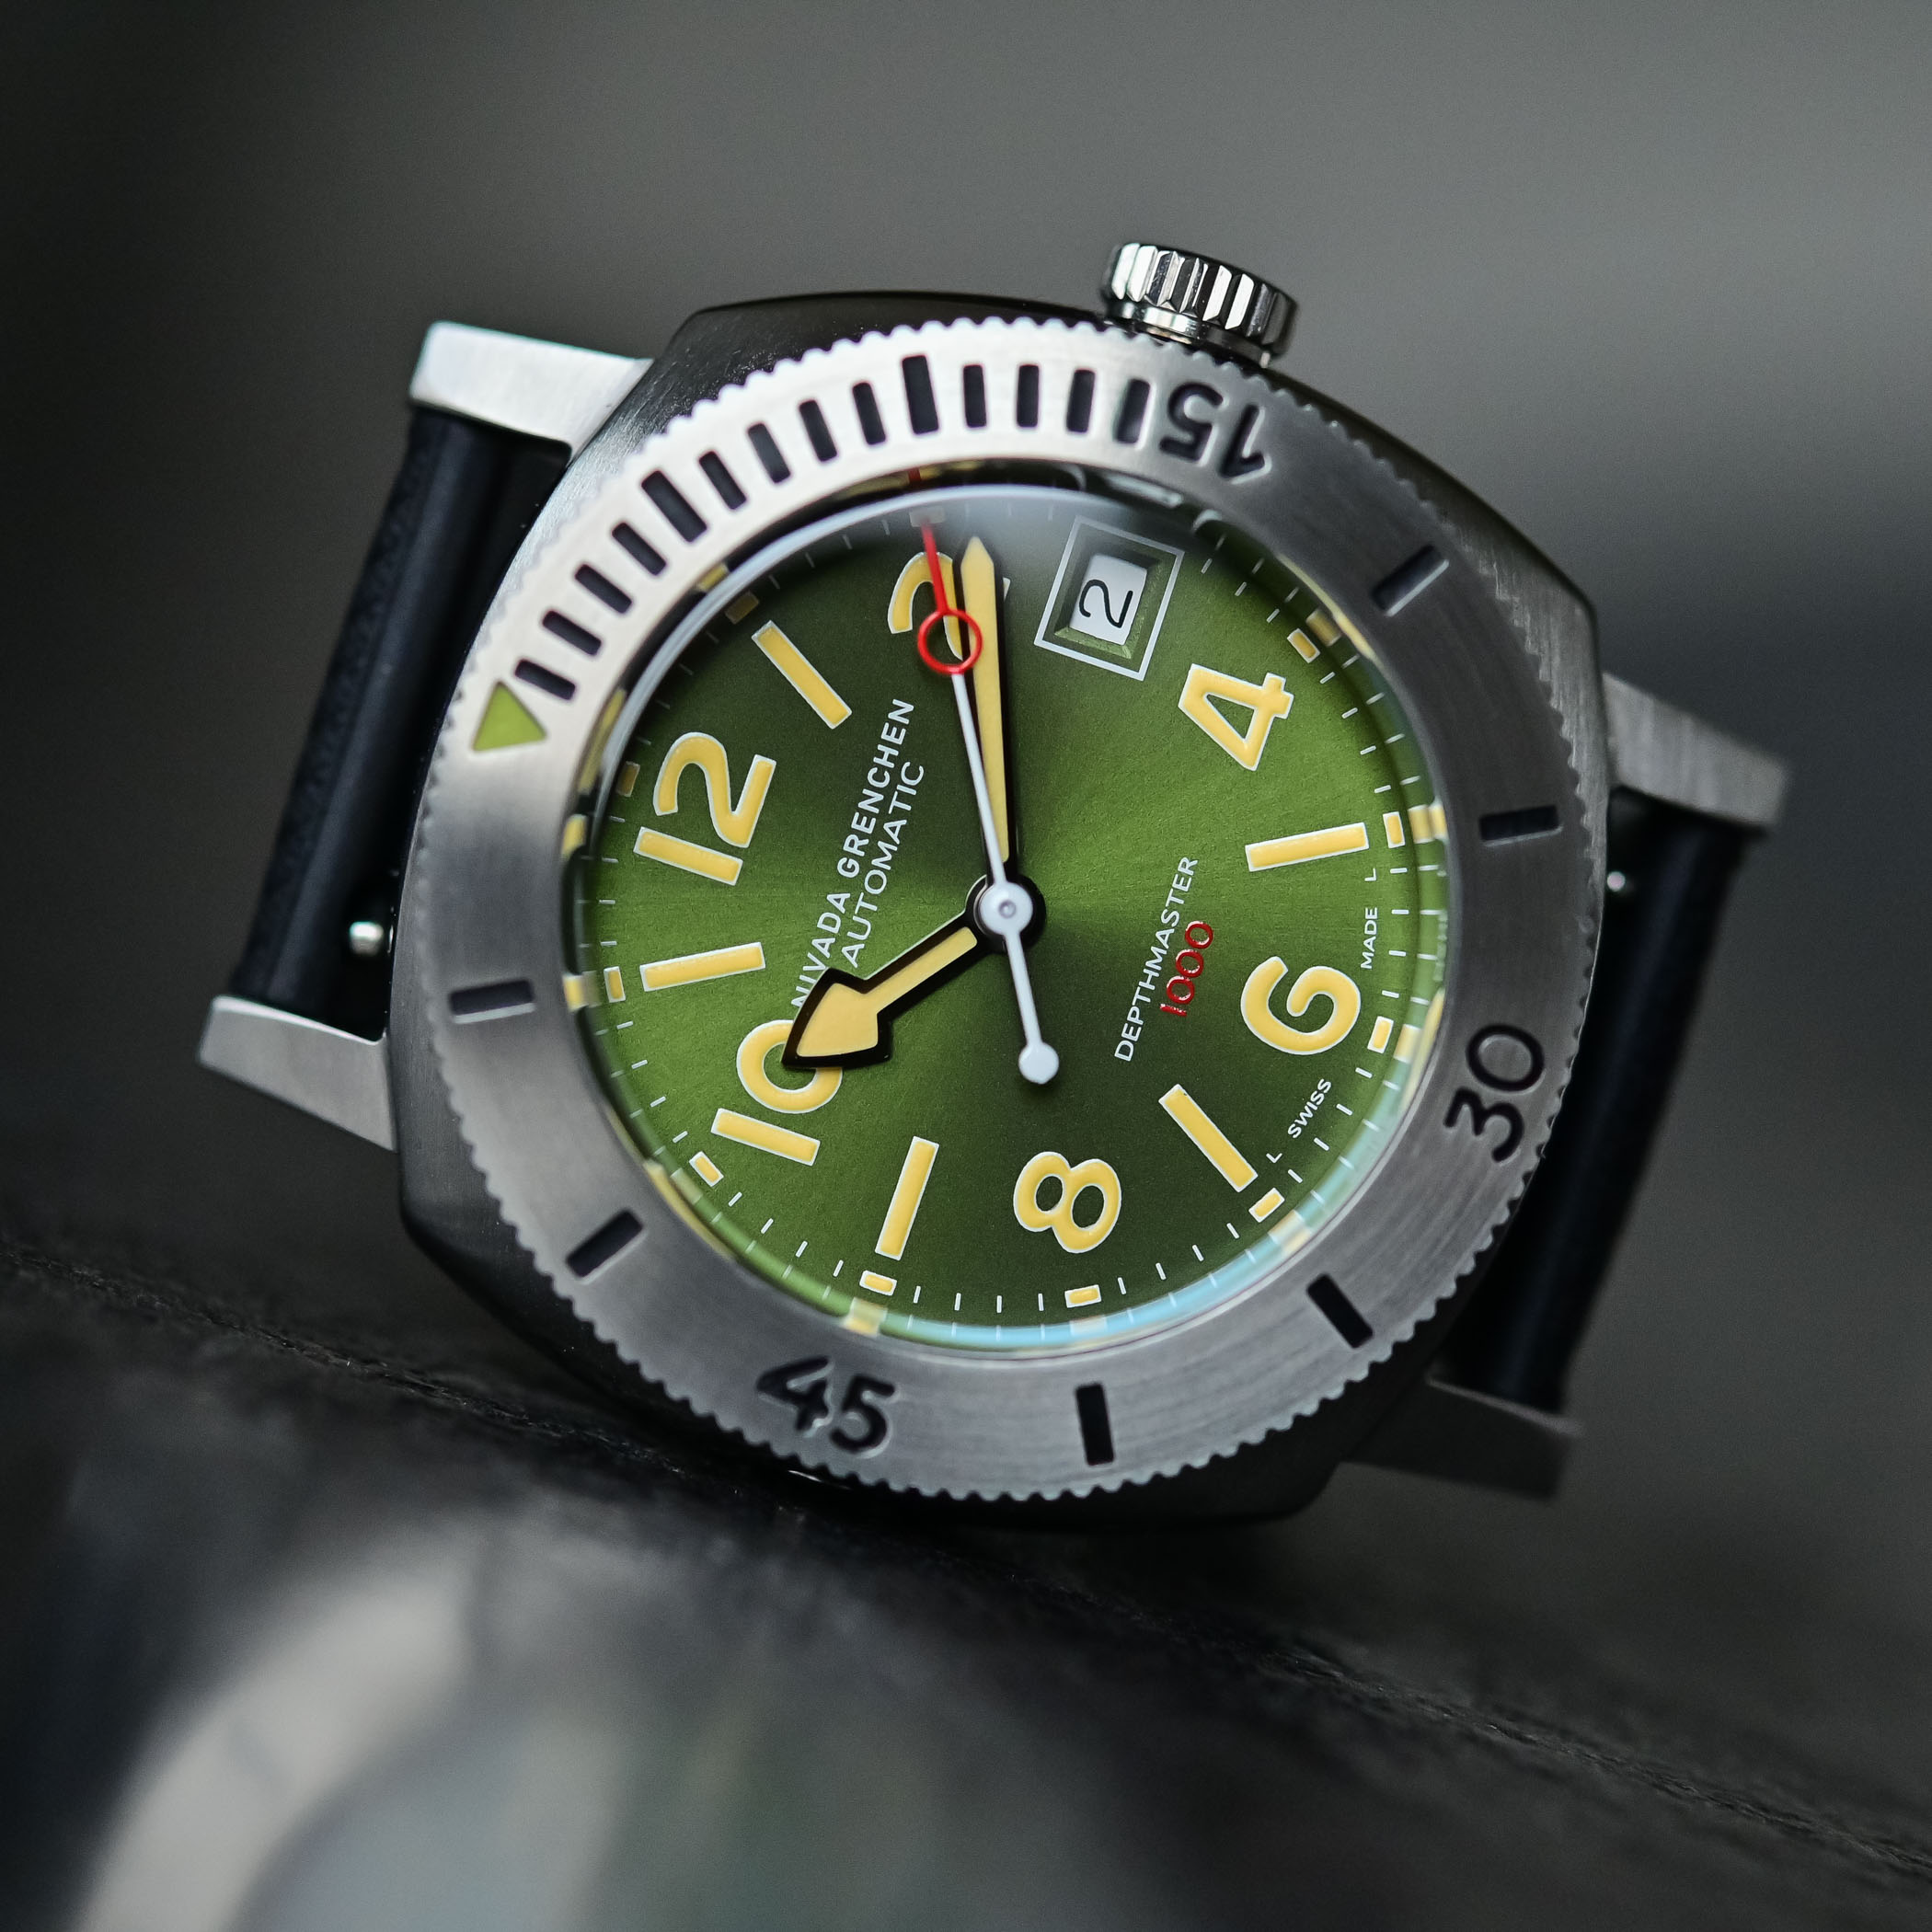 Nivada Grenchen Depthmaster Green Numerals Date 14103A09 - value proposition dive watch